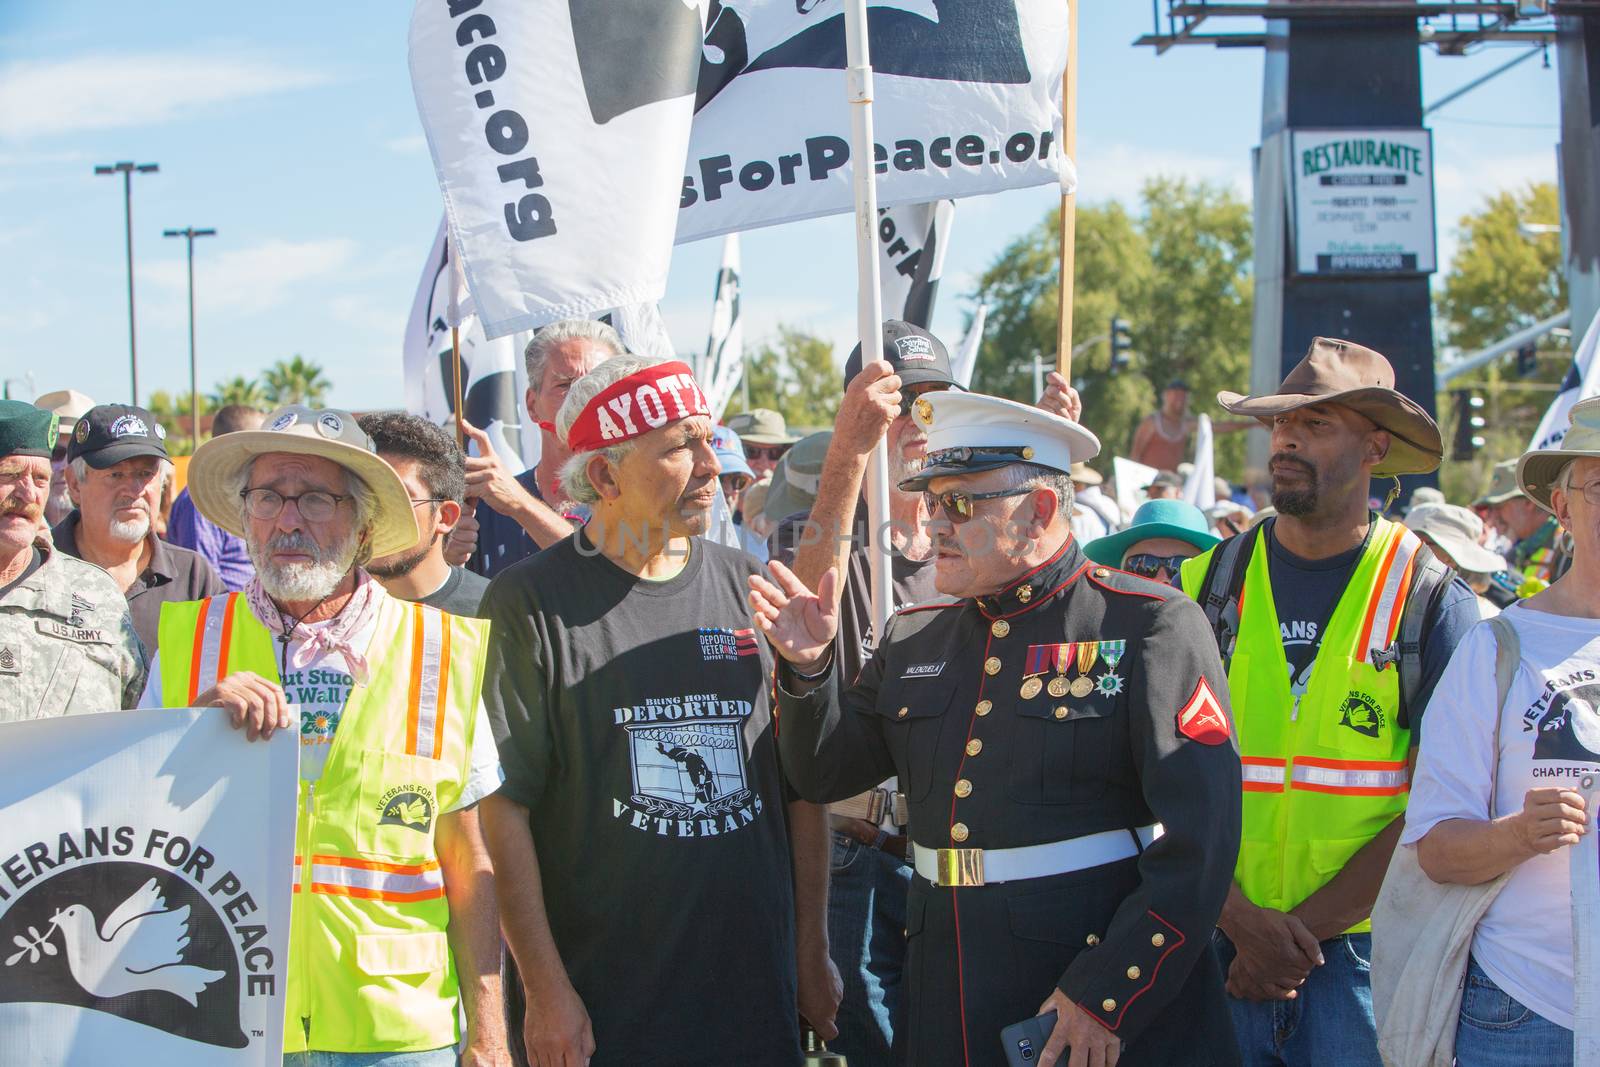 NOGALES, AZ - OCTOBER 08: Organizers with Veterans For Peace discussing logistics during border policy protest march on October 08, 2016 in Nogales, AZ, USA.